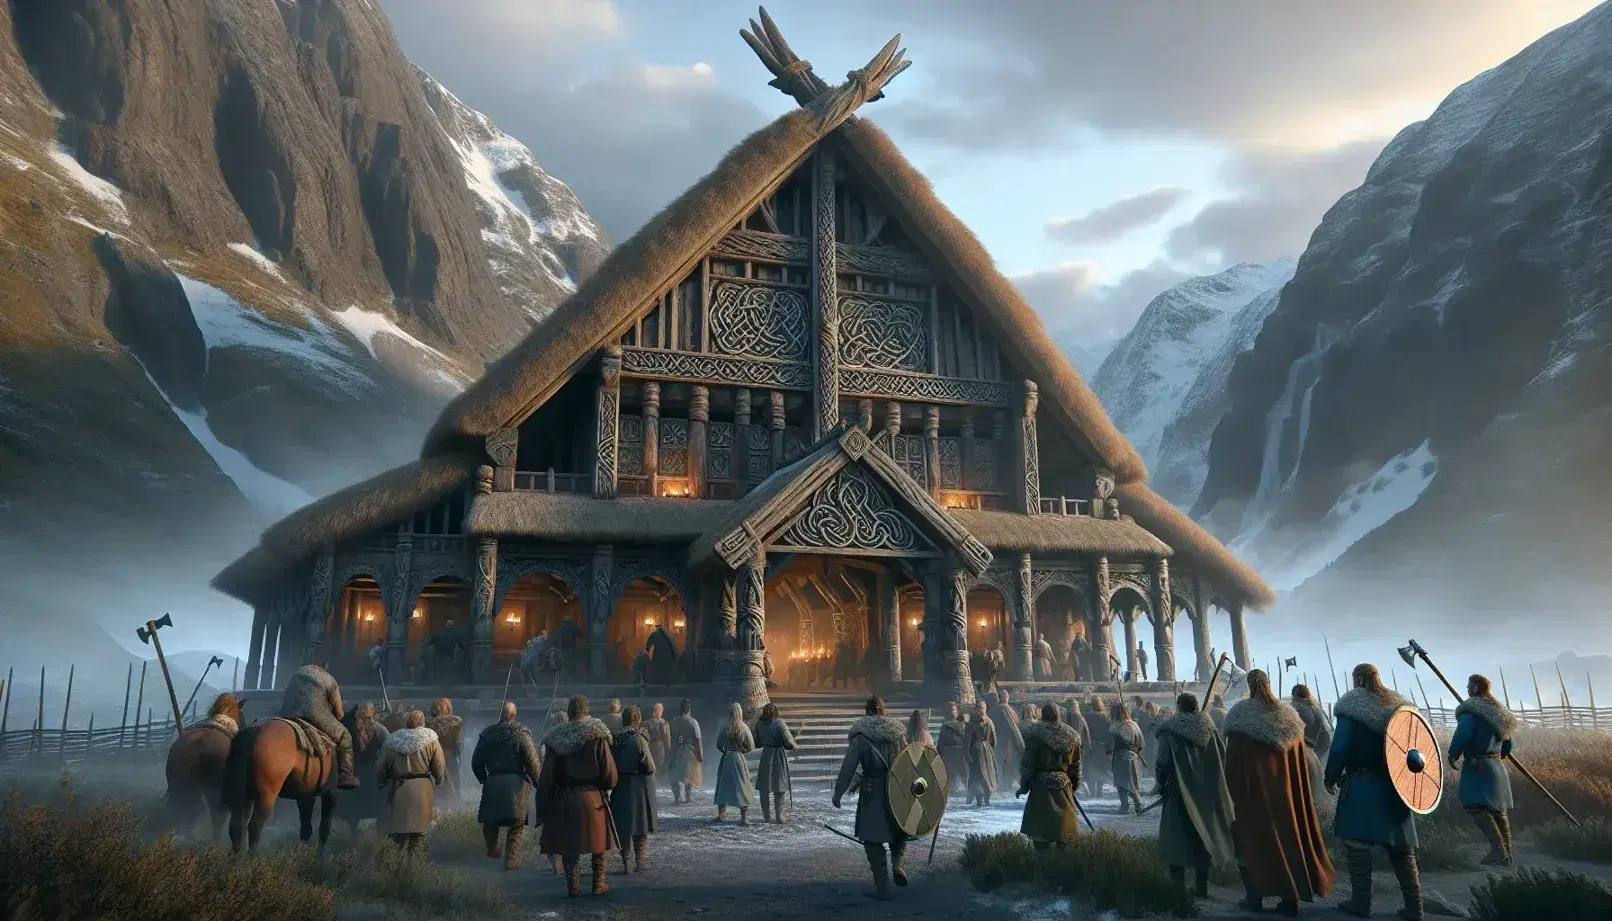 Grand Norse hall with thatched roof and carved wooden facade, surrounded by mountains under a dramatic sky, as traditionally dressed Vikings approach.